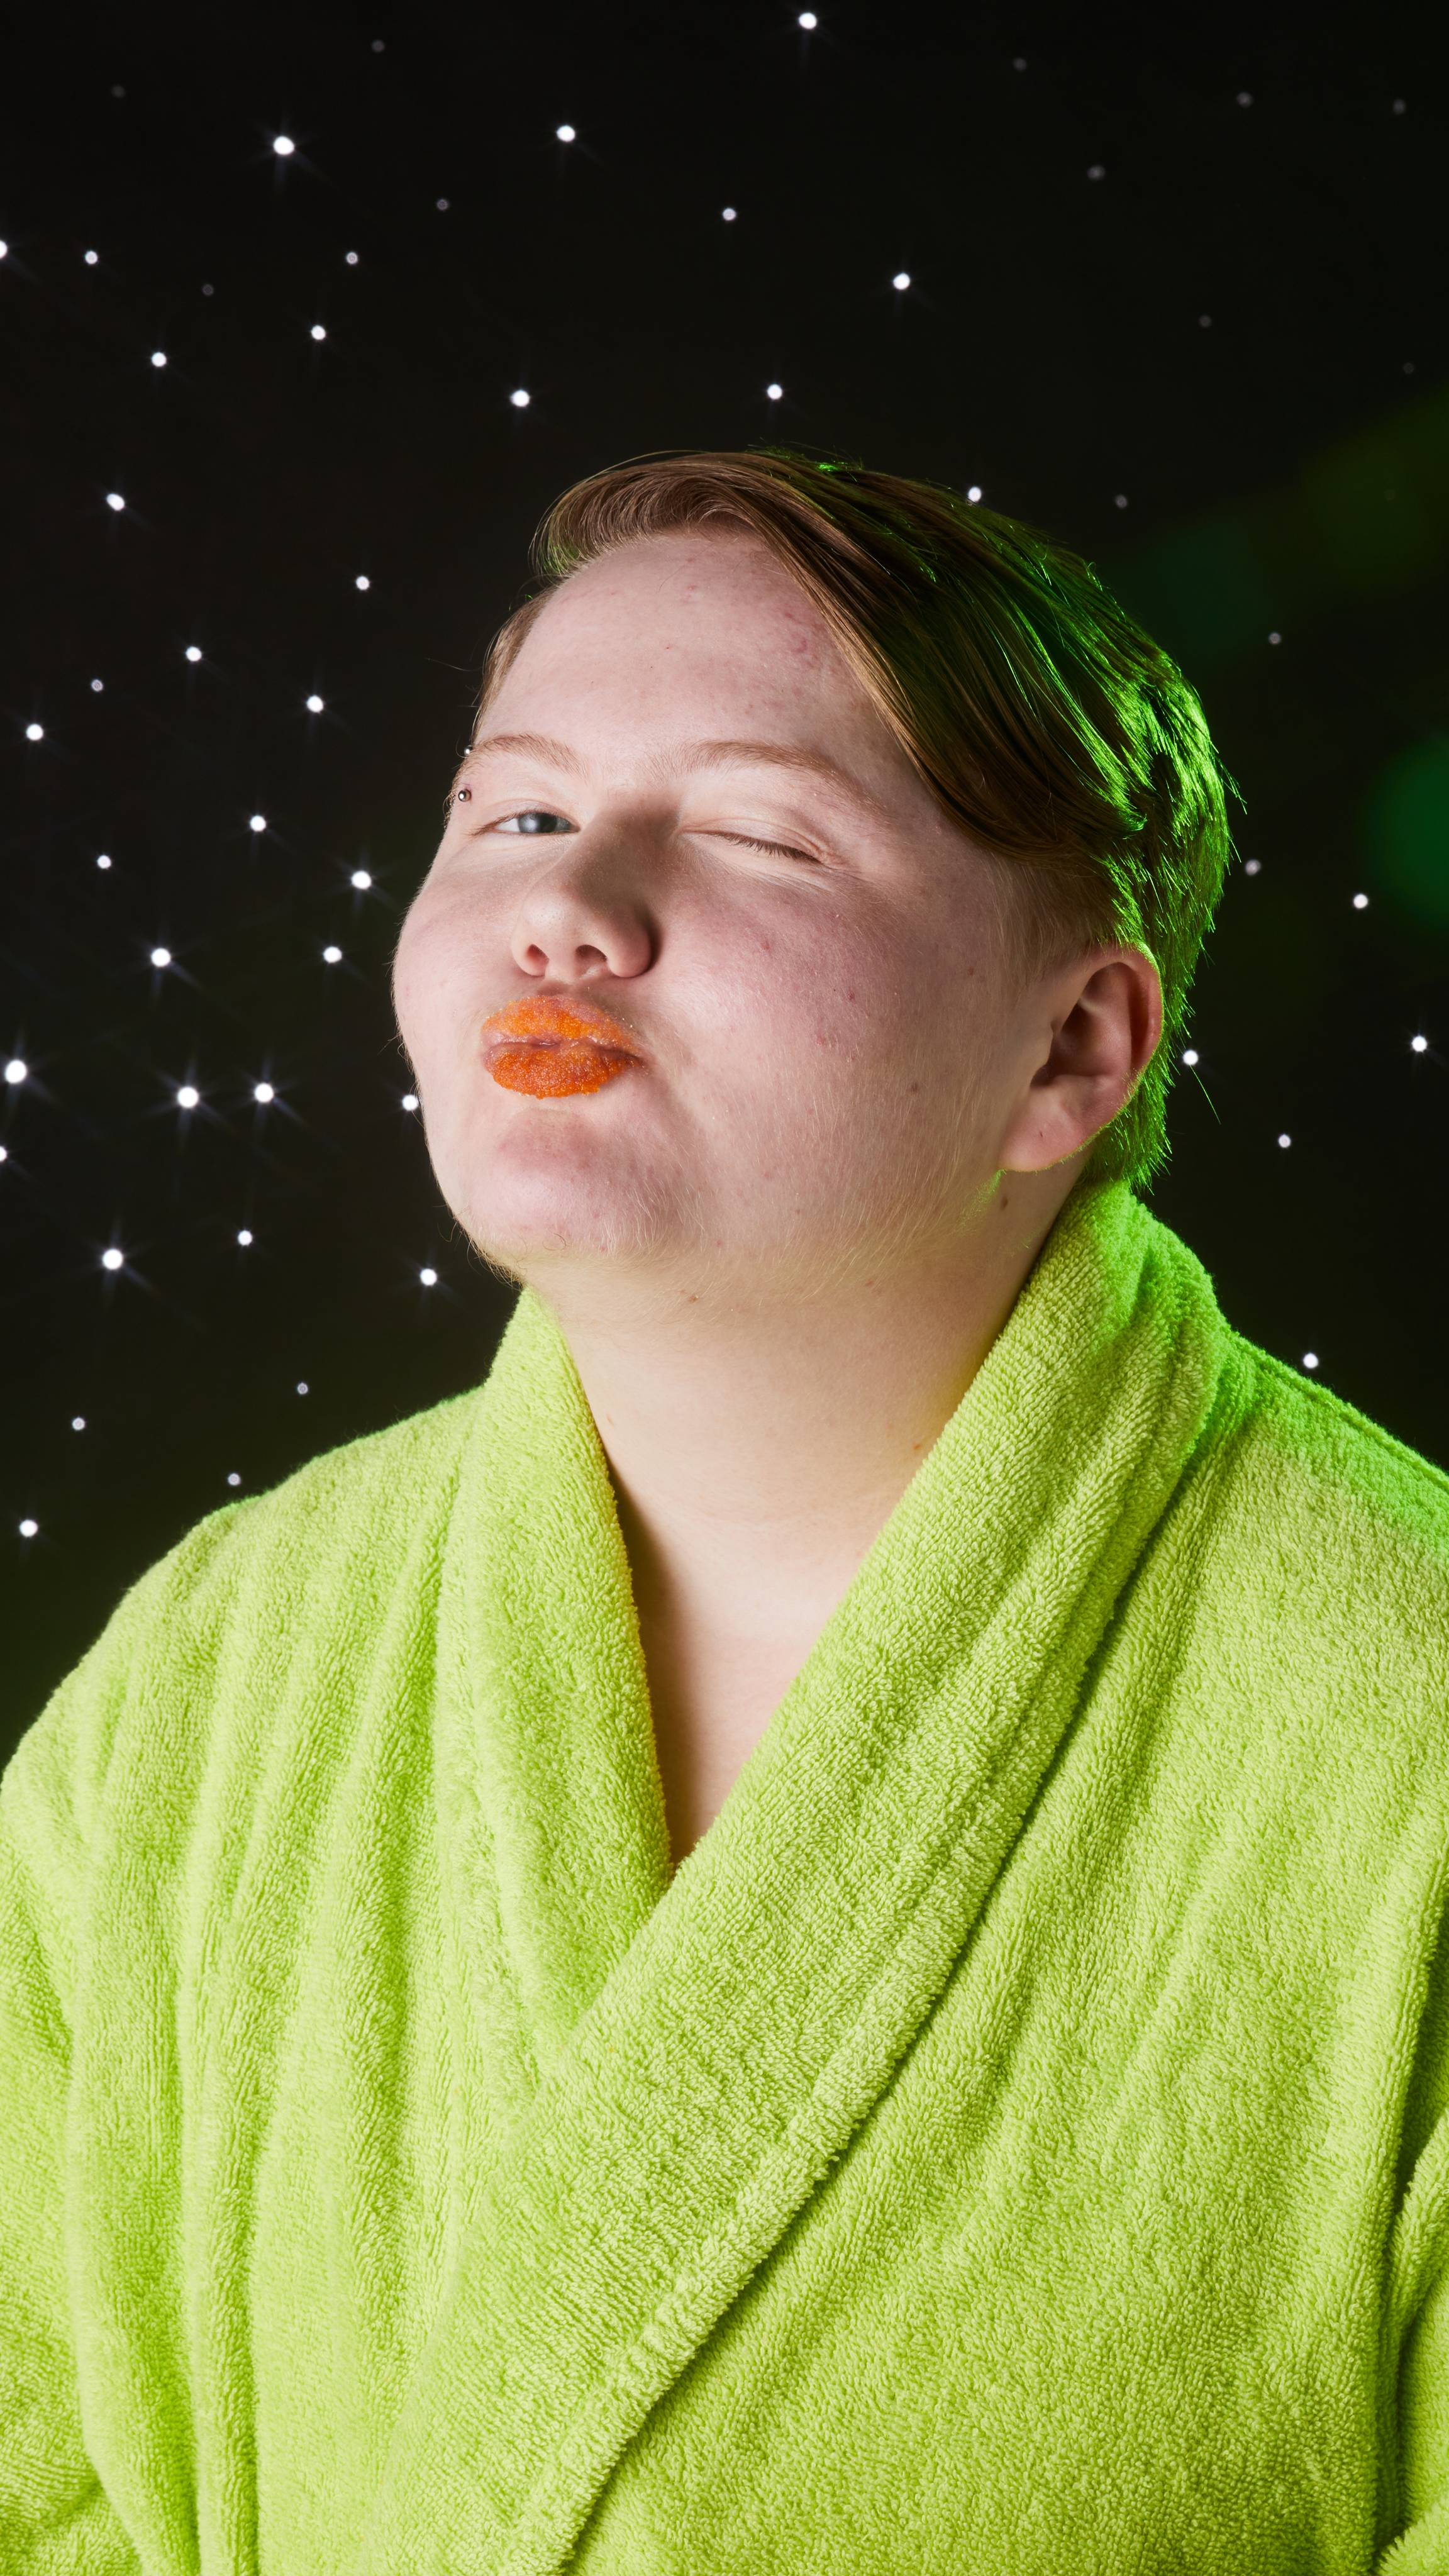 Model is in a neon-green robe as they give a cheeky wink and blow a kiss through orange, sugar-coated lips.